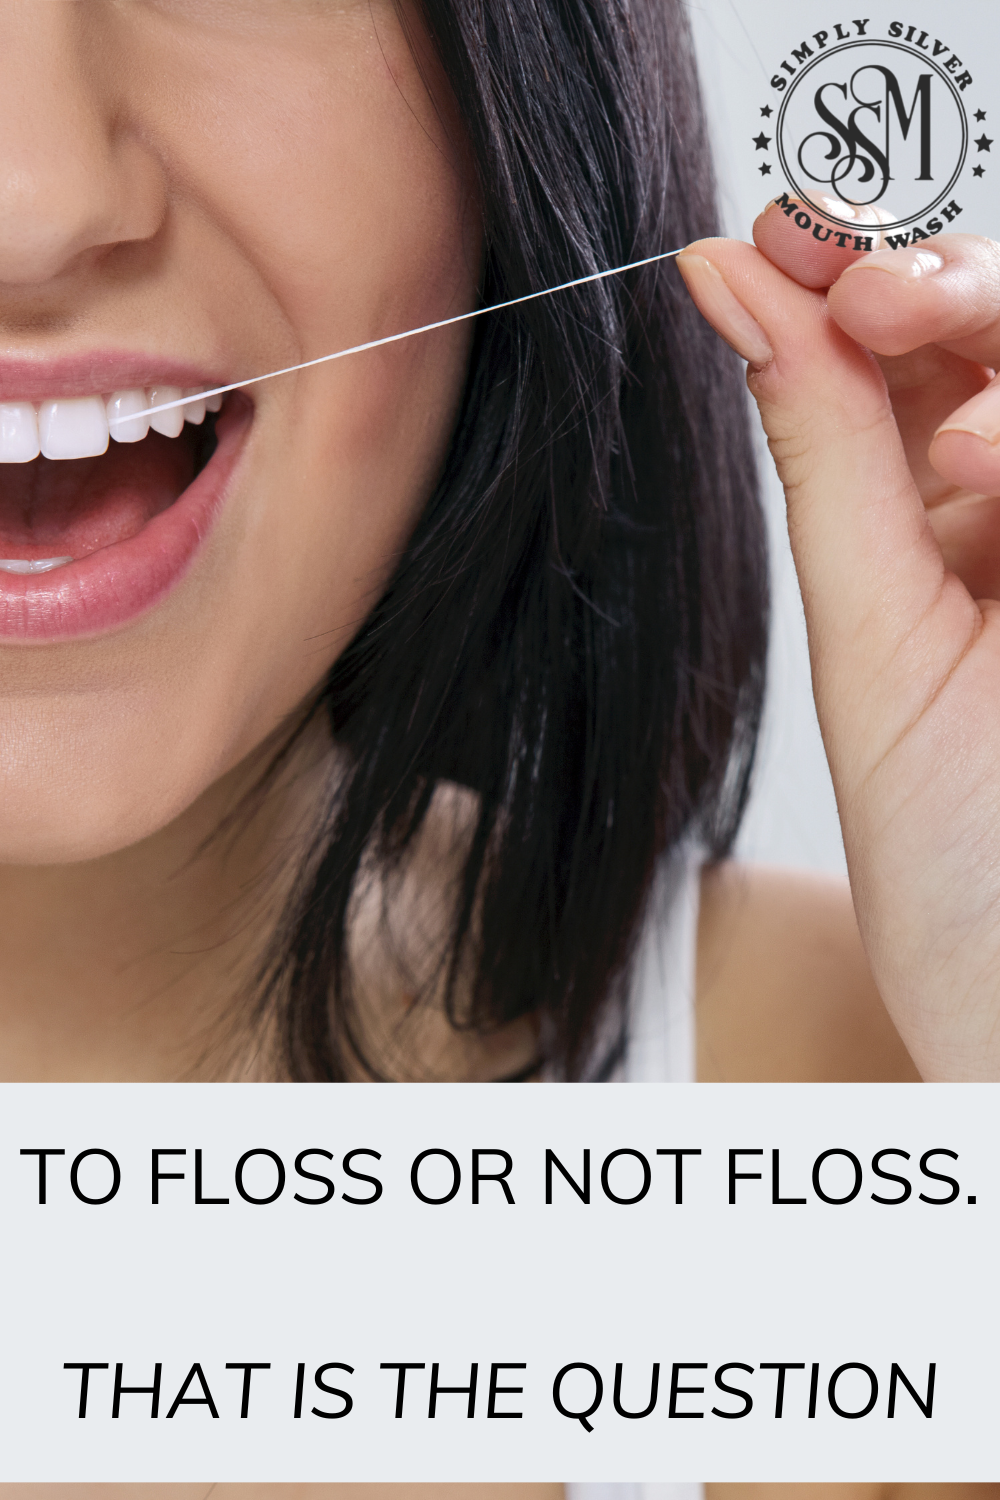 To floss or not to floss...THAT is the question!